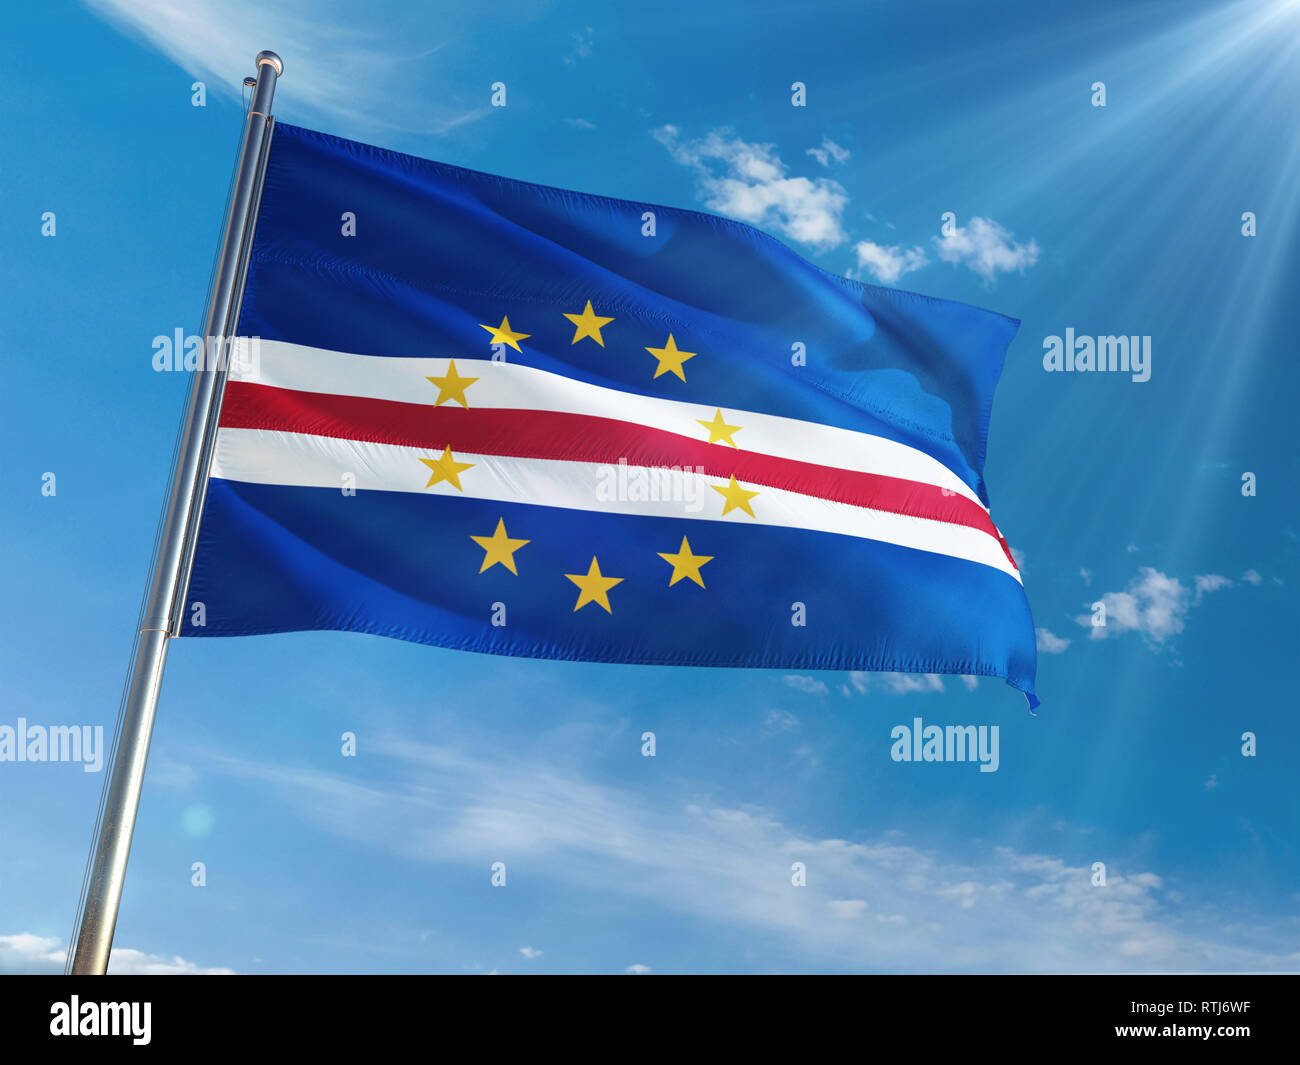 Cape Verde National Flag Waving on pole against sunny blue sky background. High Definition Stock Photo